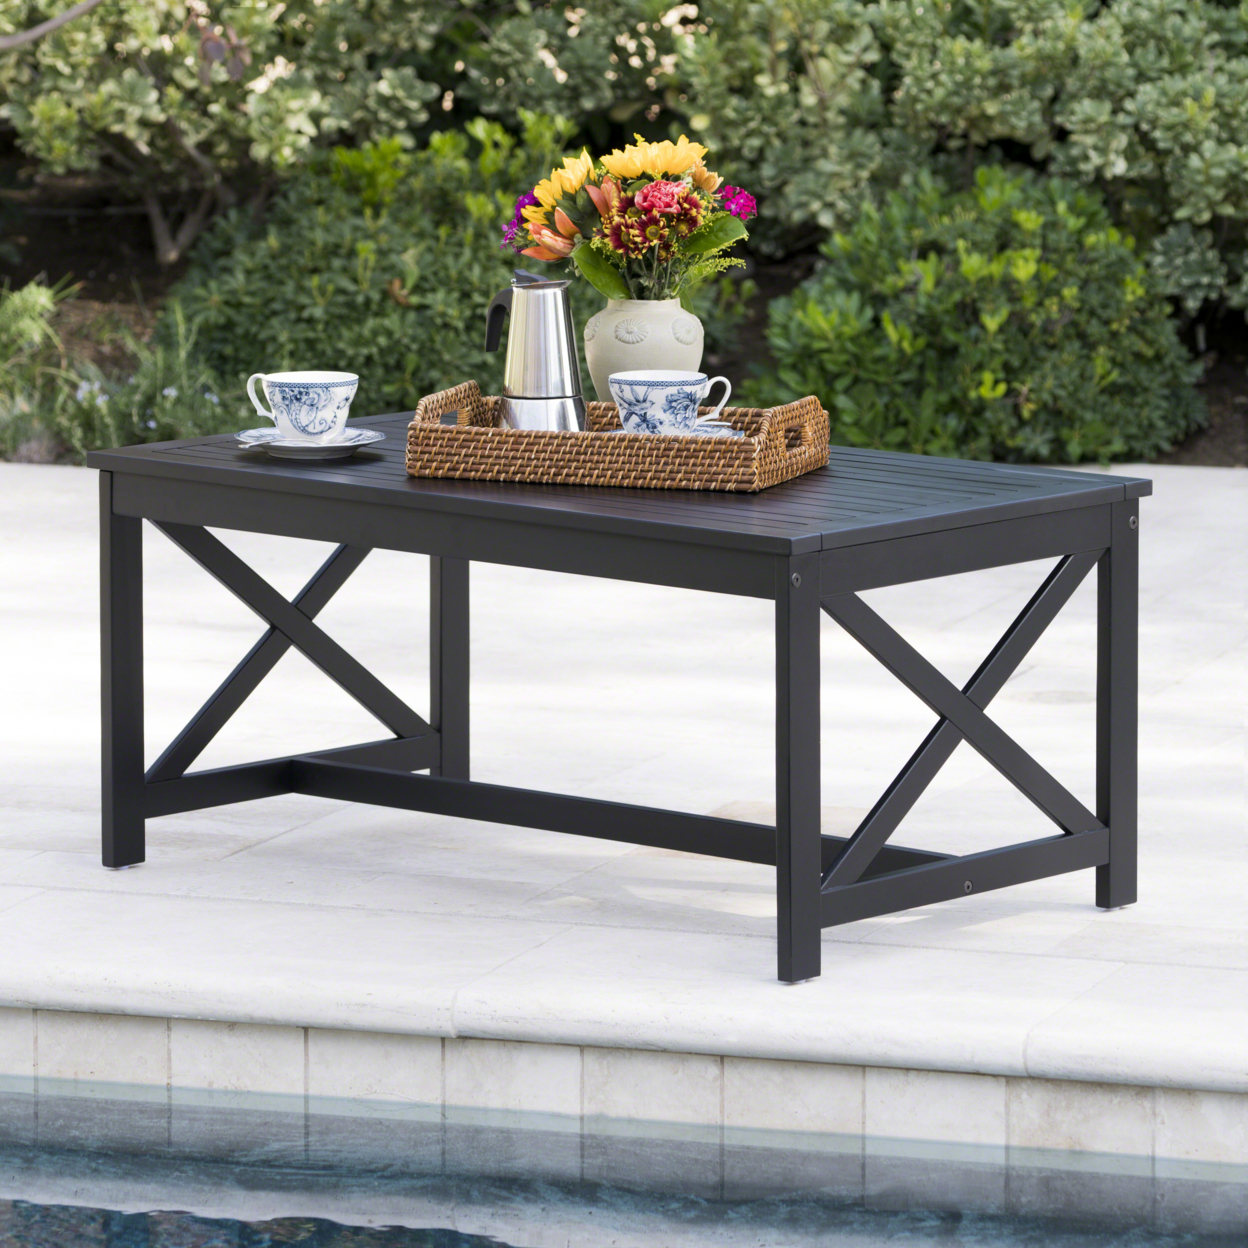 Ismus Outdoor Finished Acacia Wood Coffee Table - White